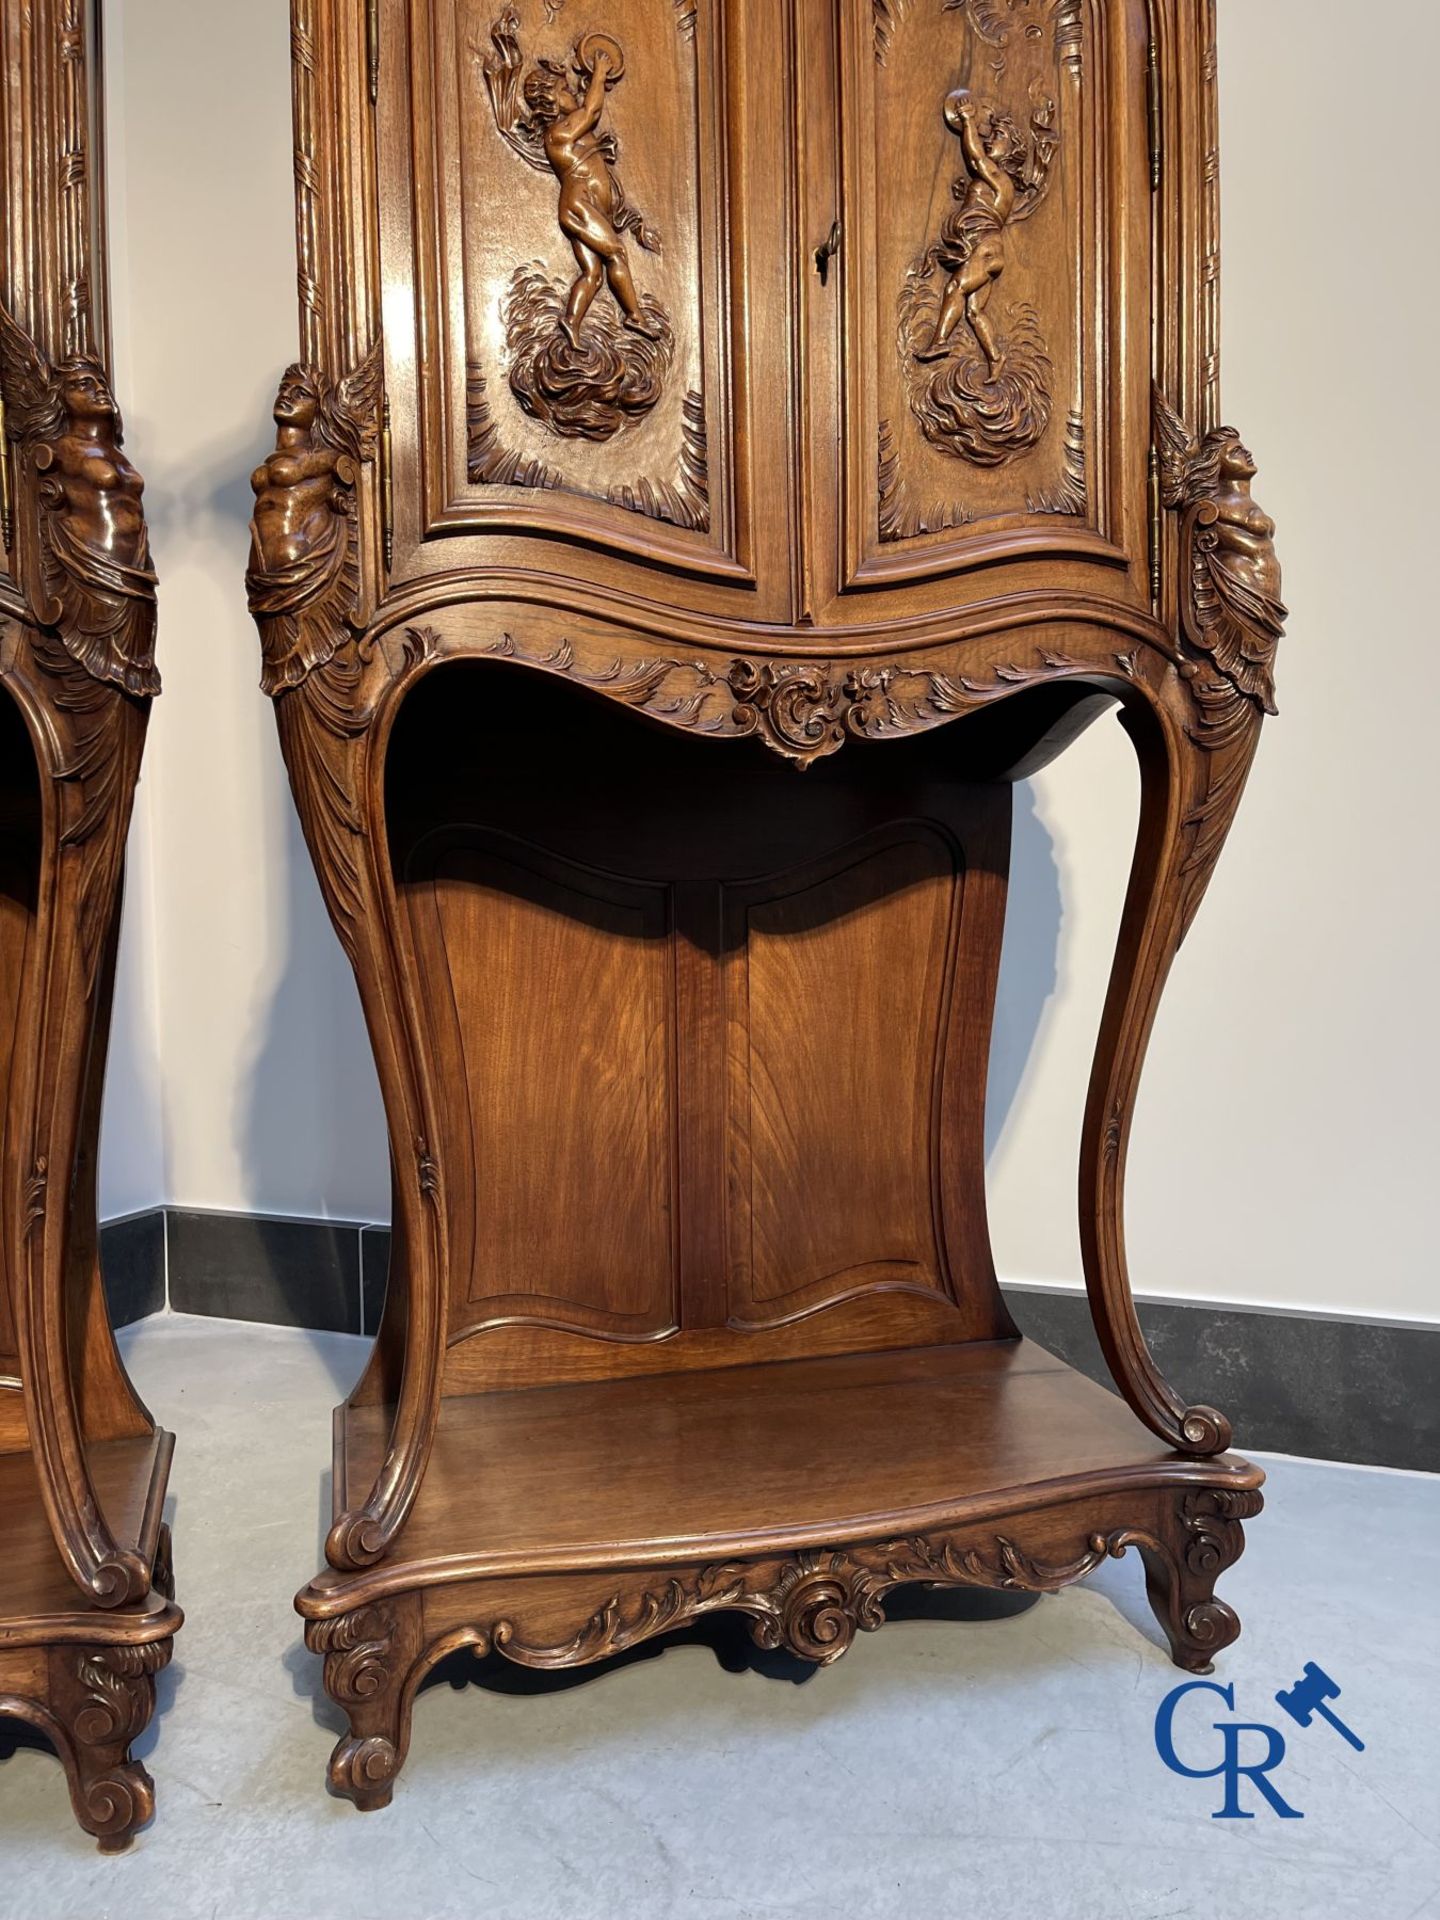 Furniture: A pair of finely carved furniture. LXV style. - Image 8 of 15